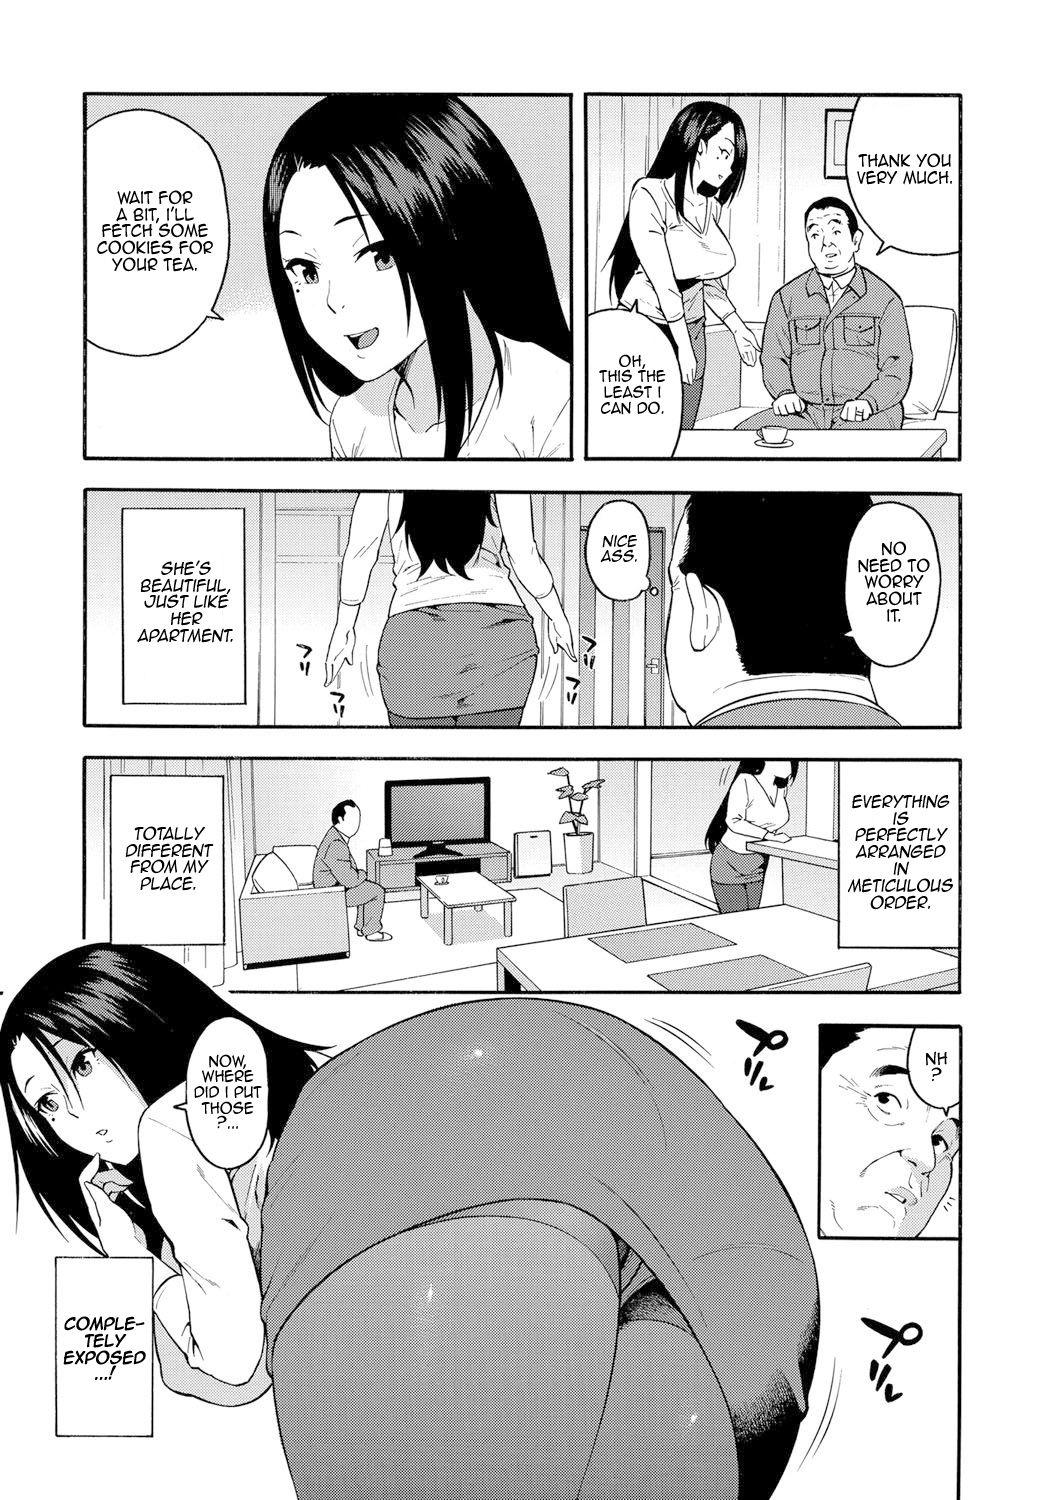 Petera 15-nengo no Onna | The Girl From 15 Years Ago Striptease - Page 5